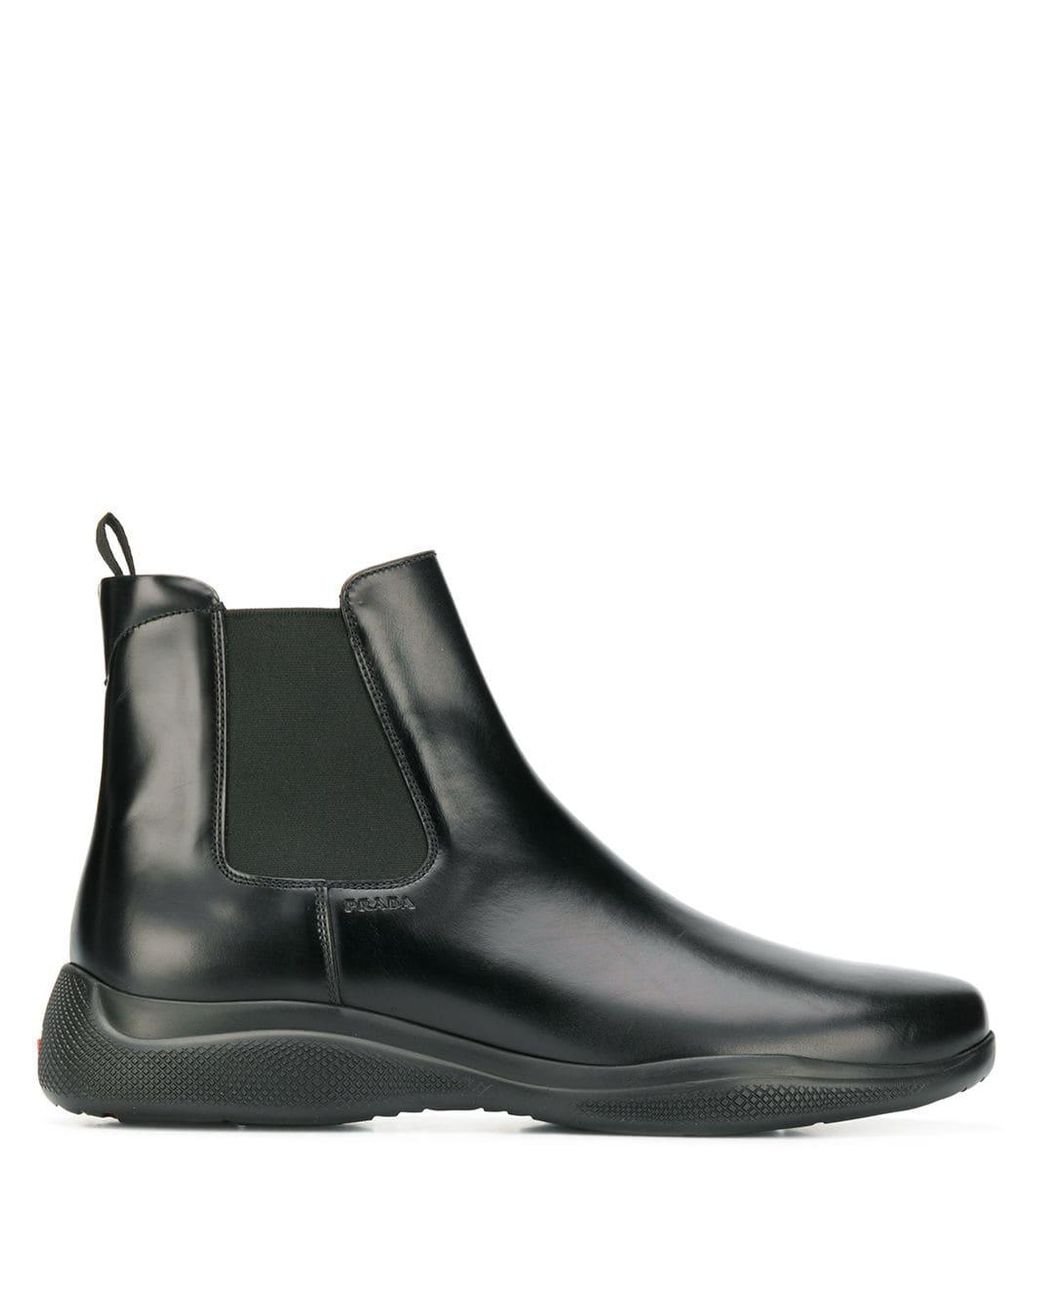 Prada Leather Space Chelsea Boots in Black for Men - Lyst